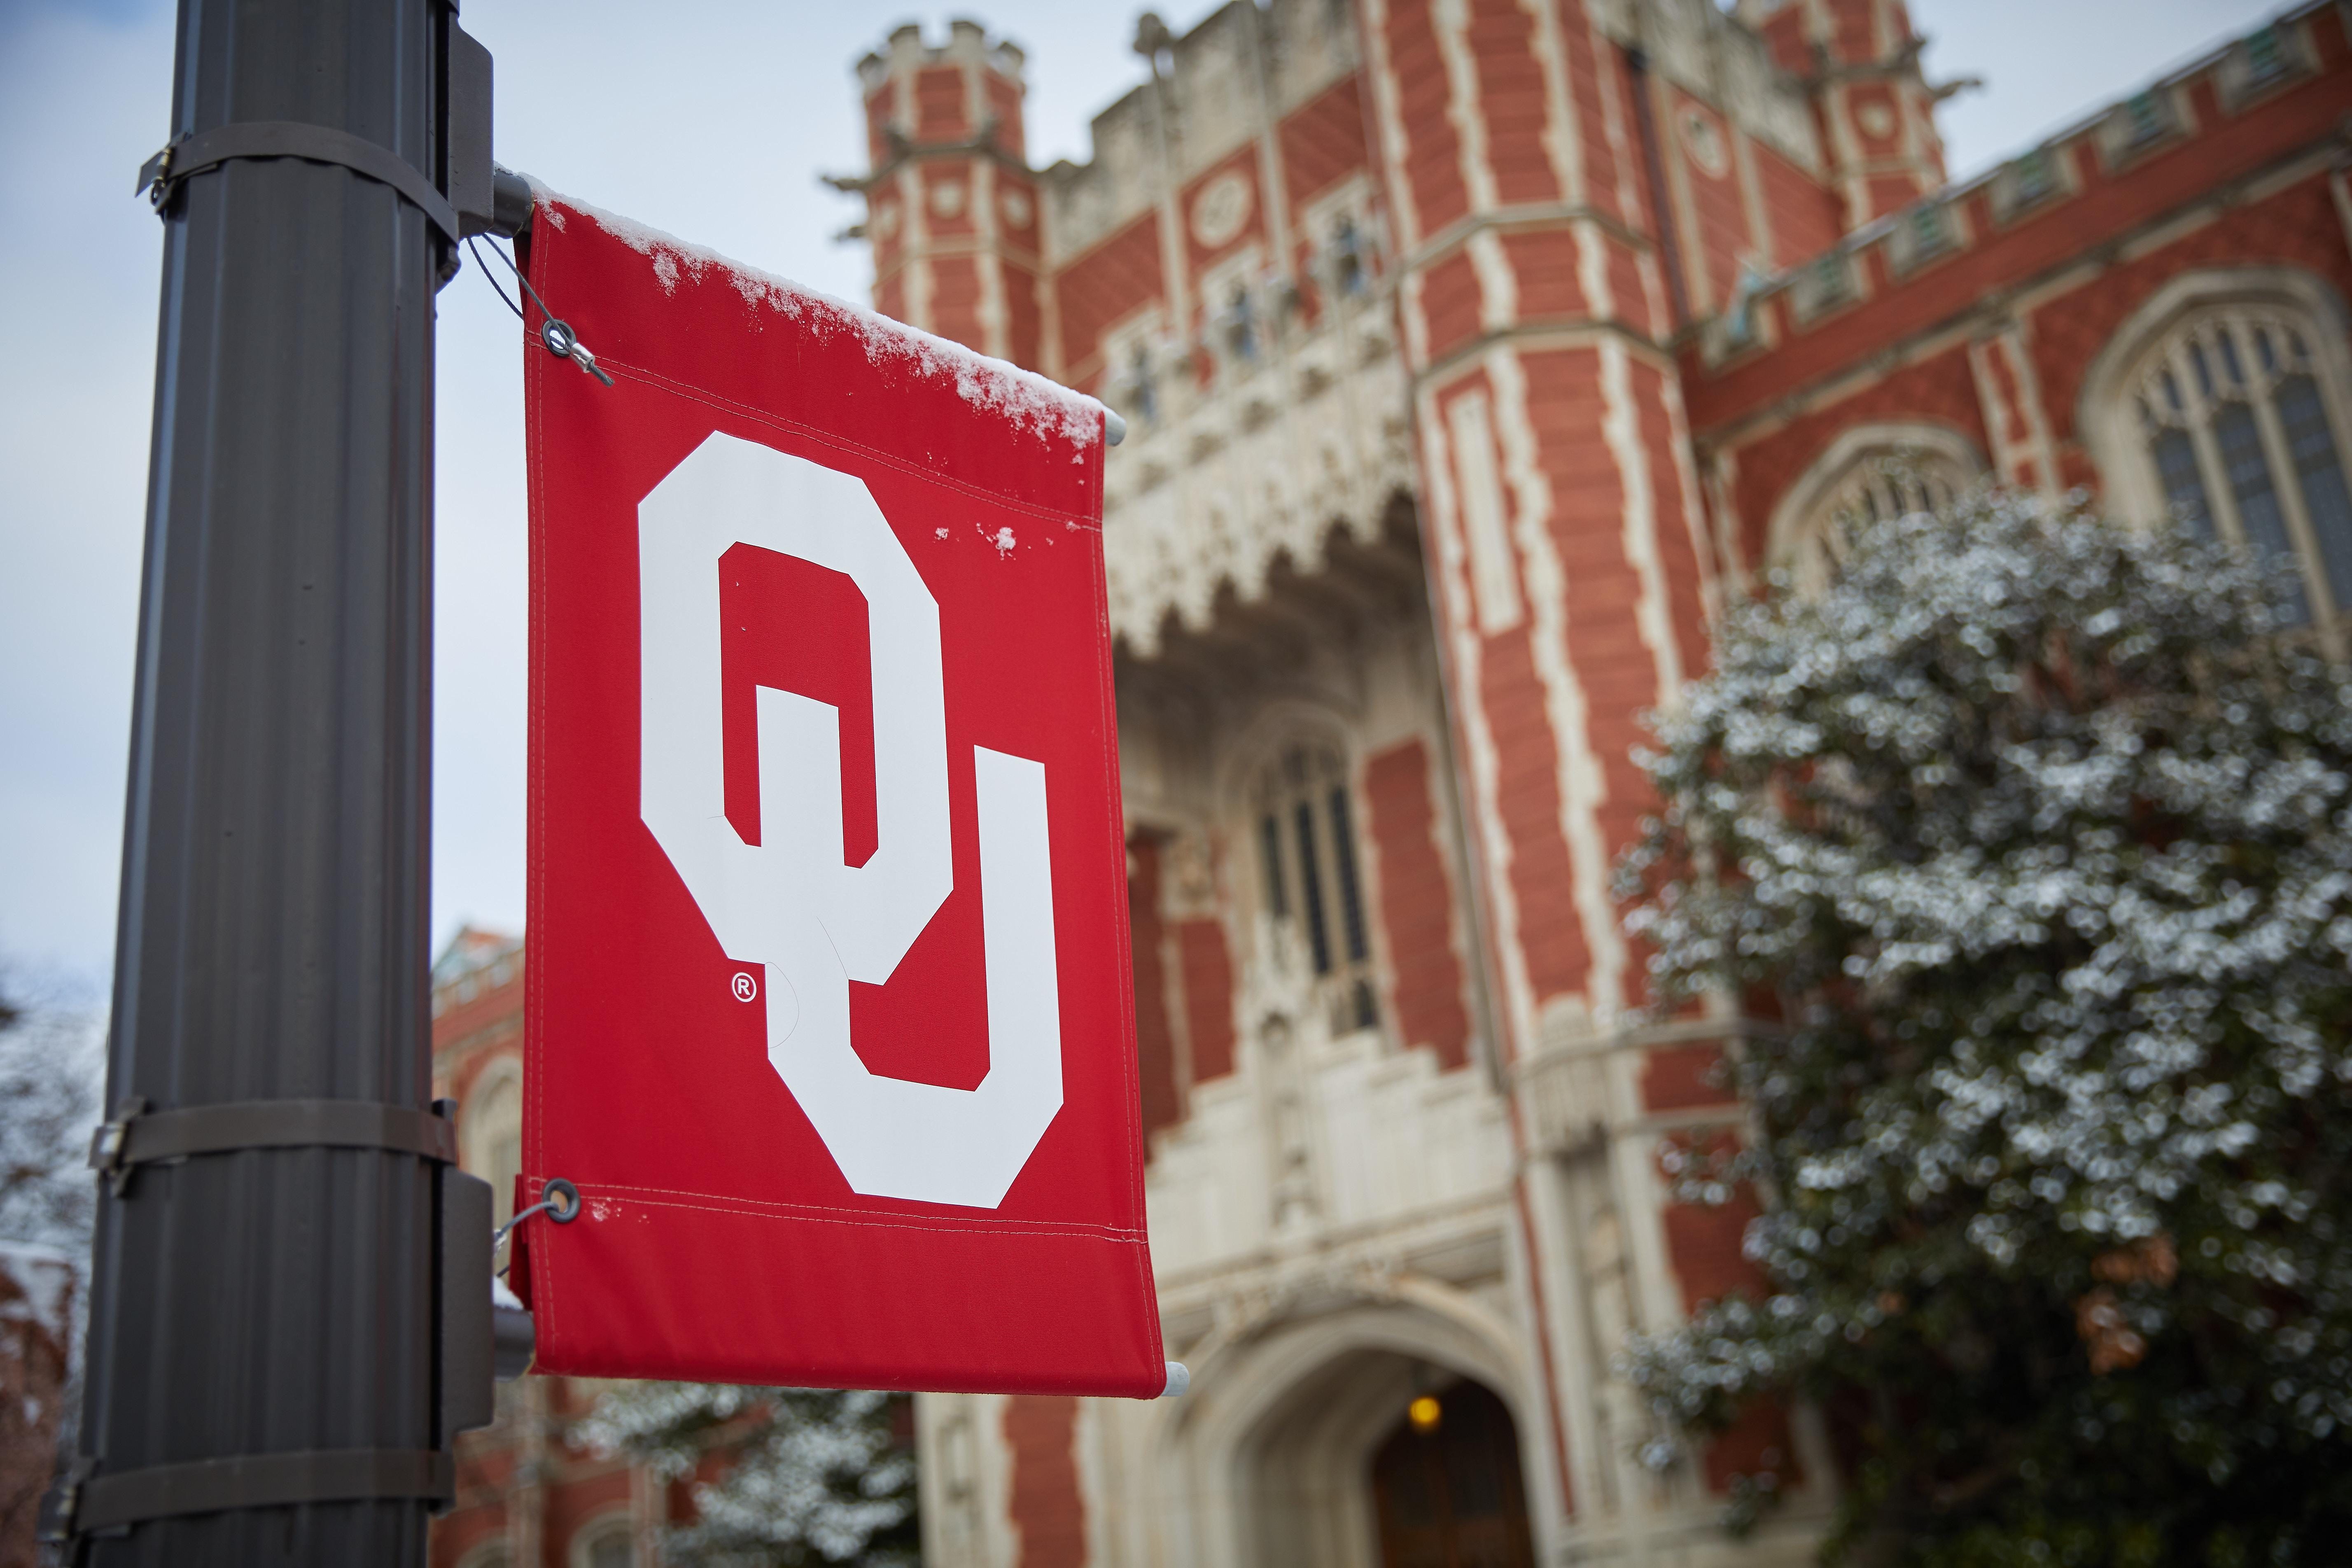 OU flag on a light pole in the winter.